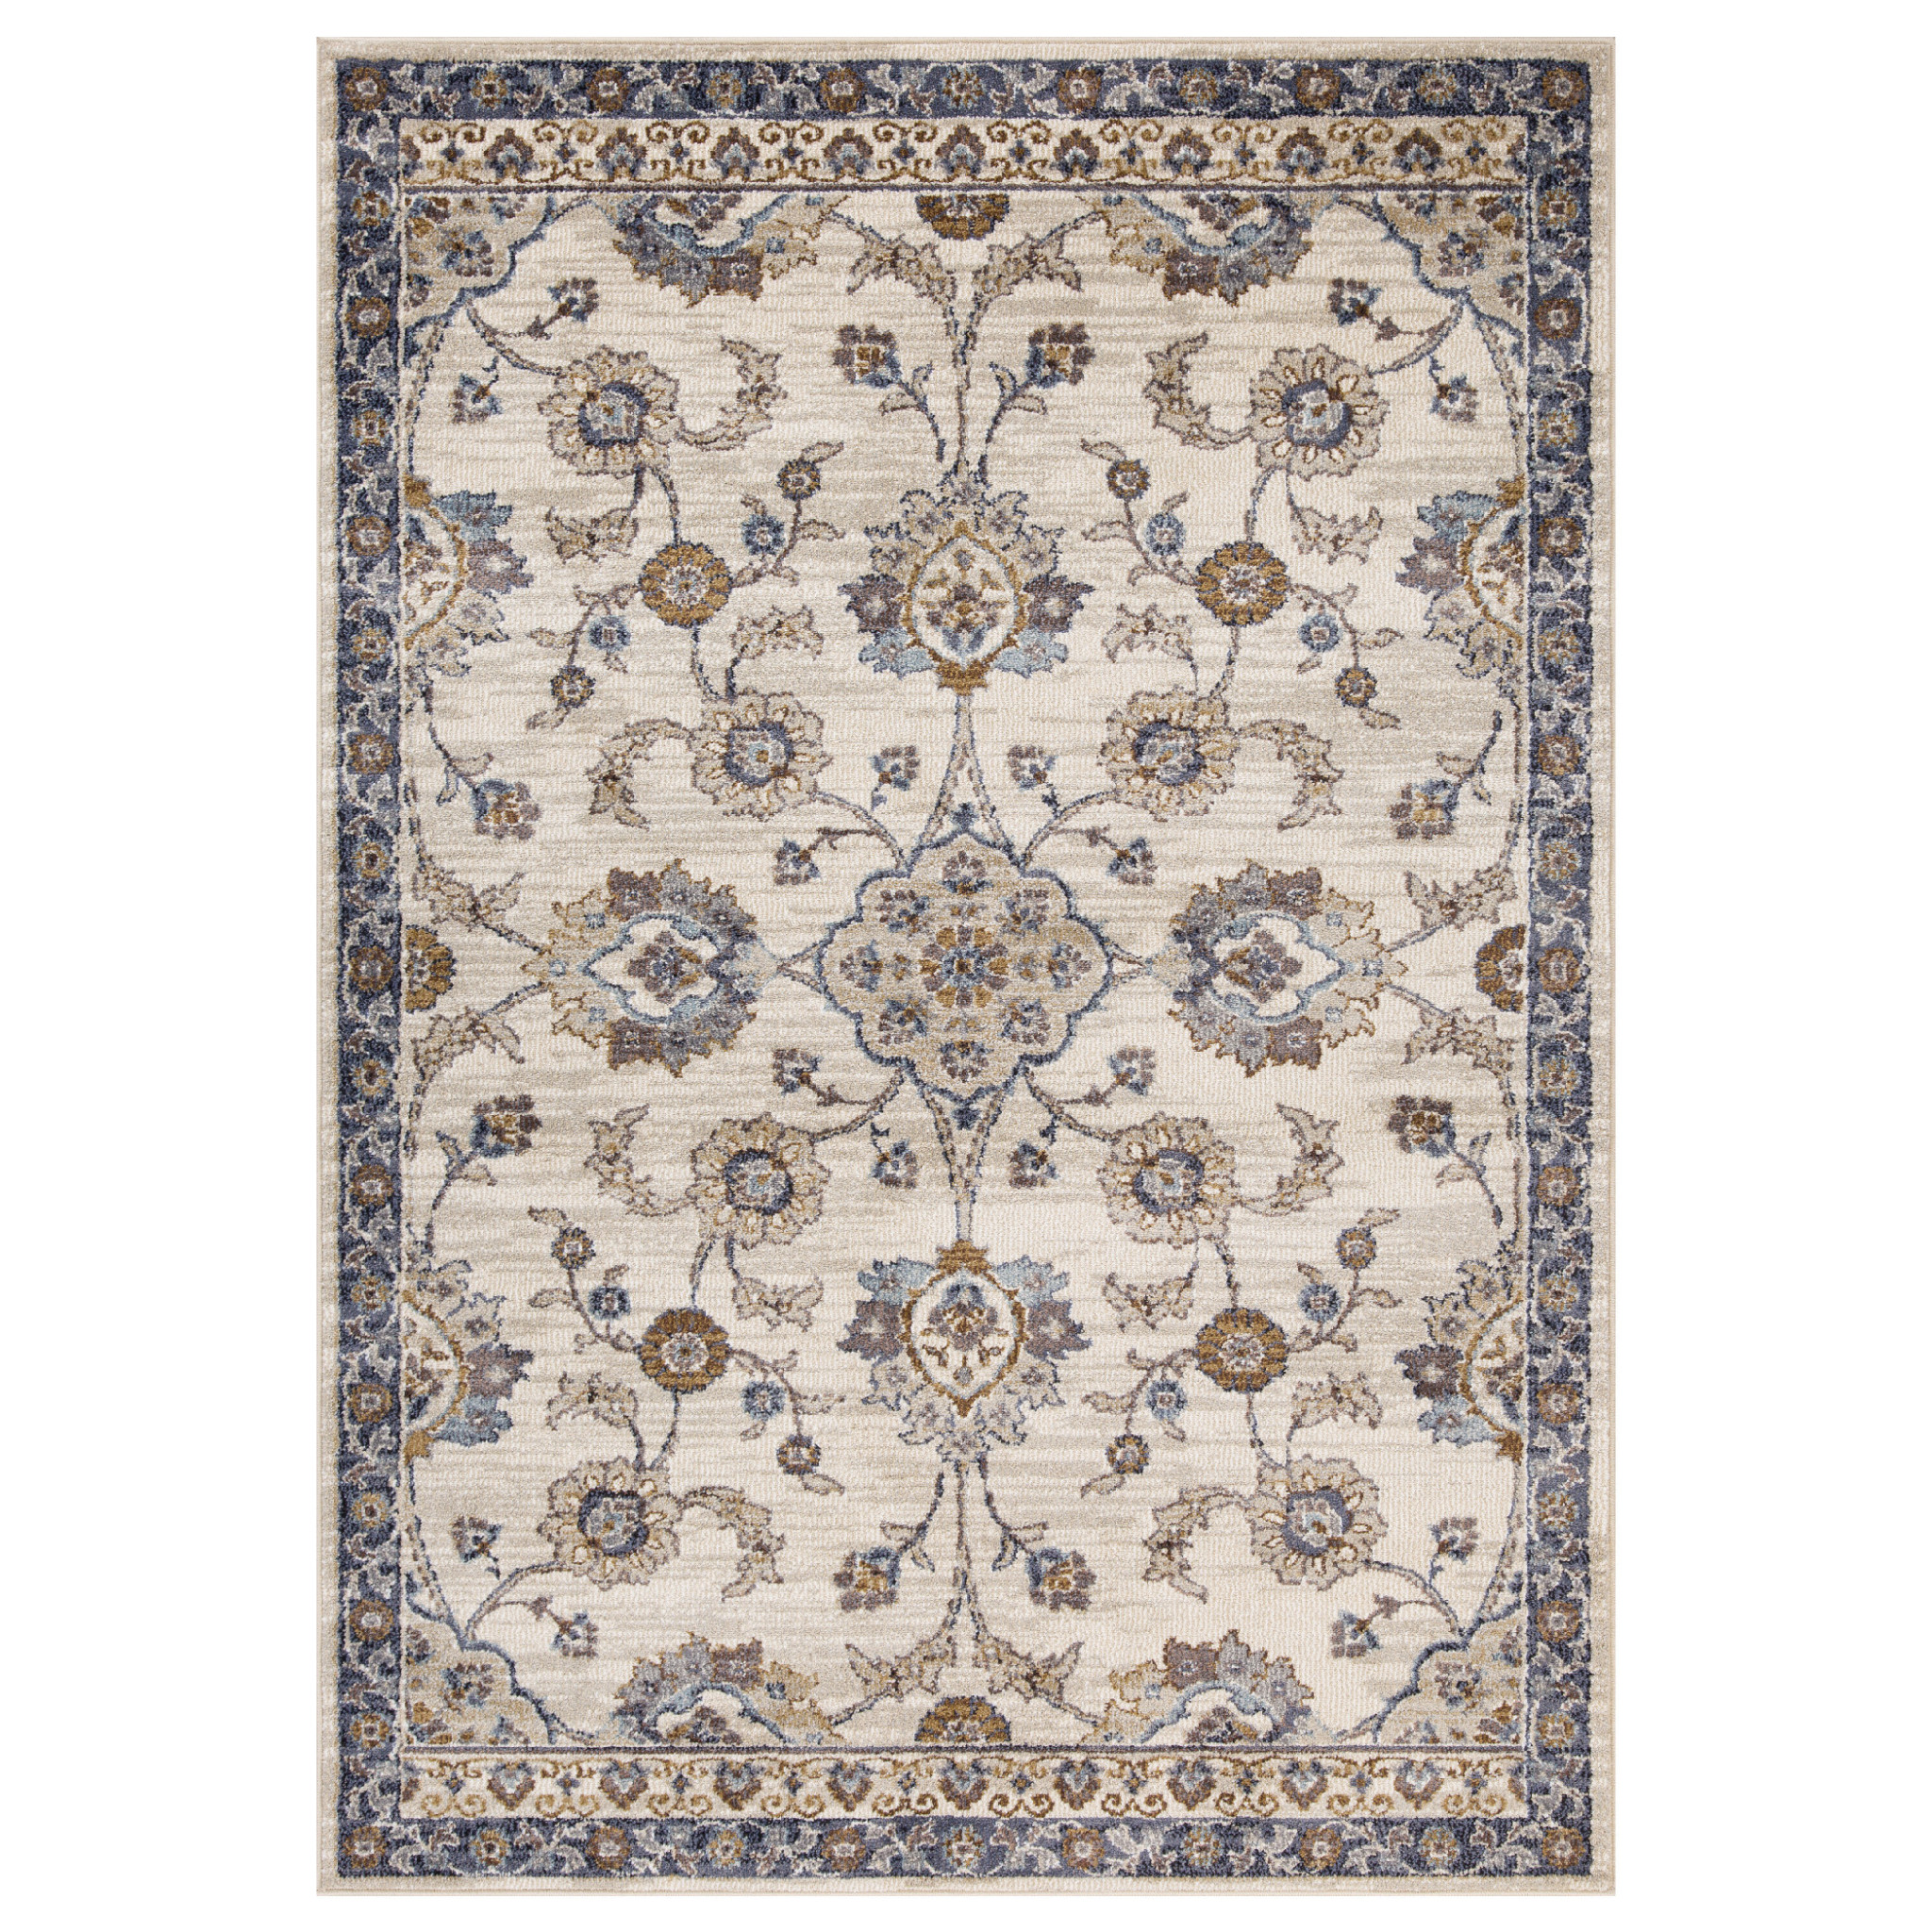 6' x 9' Gray and Ivory Floral Power Loom Area Rug-532174-1